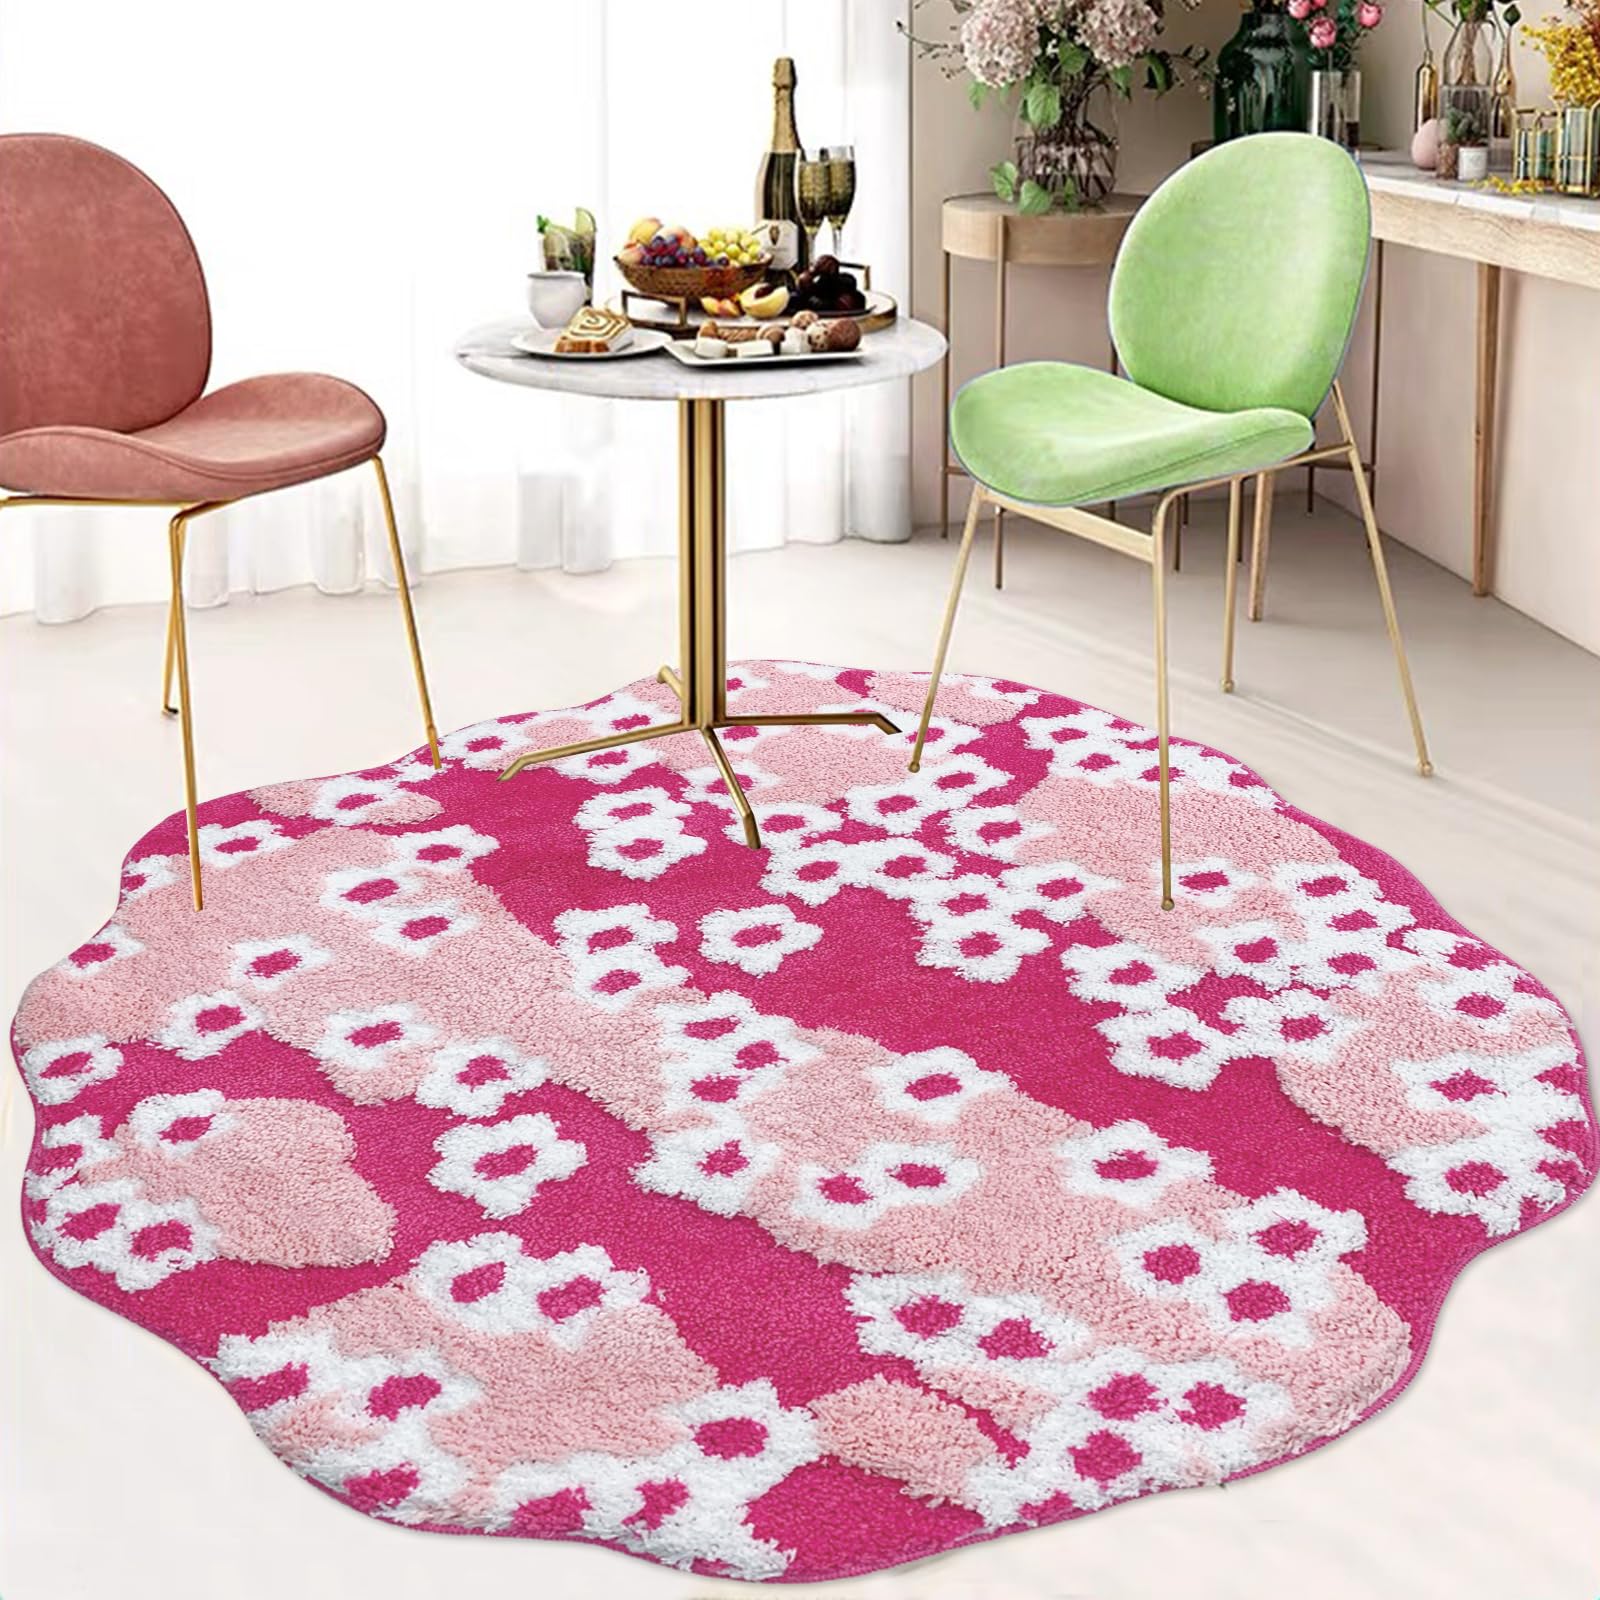 USTIDE Moss Area Rug, Floral Shape Area Rugs Super Fluffy and Washable Carpet Anti-Slip Round Farmhouse Floor Mat Multi-Colored Rug for Bedroom Playroom Kitchen Decor (Pink,39.3’’)